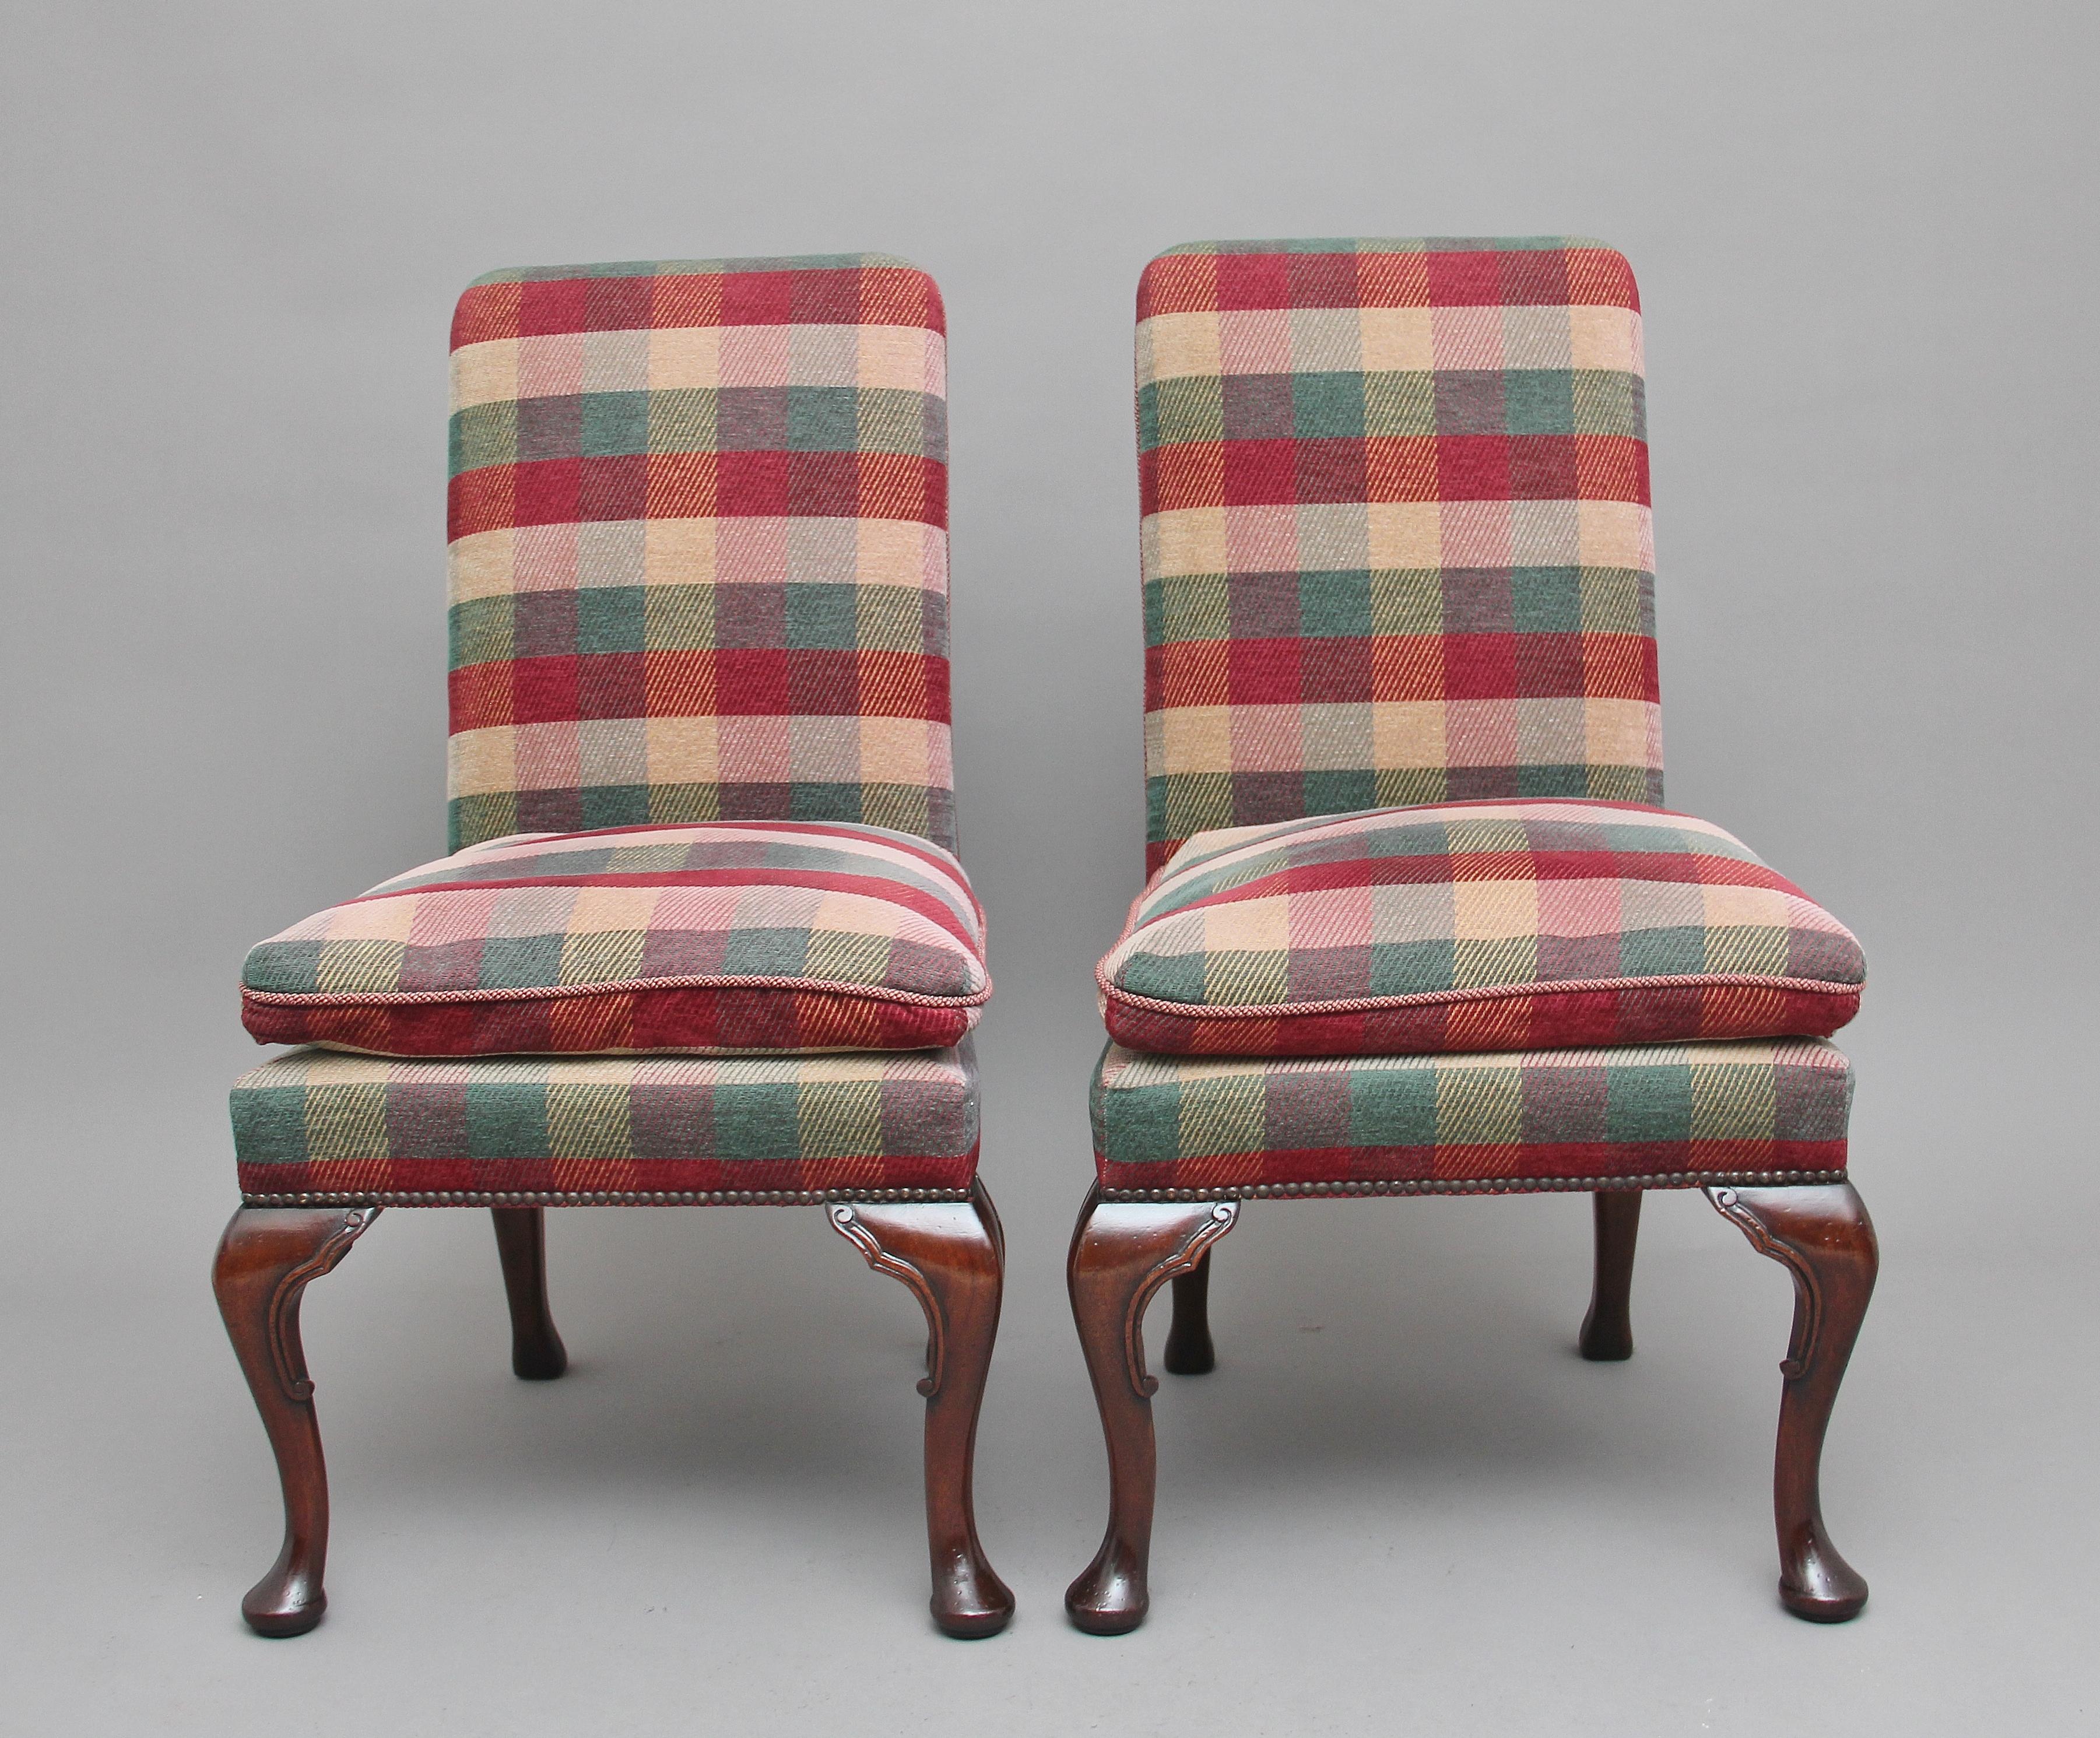 A pair of mid-20th century upholstered chairs in the George I style, the chairs upholstered in a tartan fabric with brass stud decoration, having high backs and an attached cushioned seat, supported on front carved cabriole legs ending with a